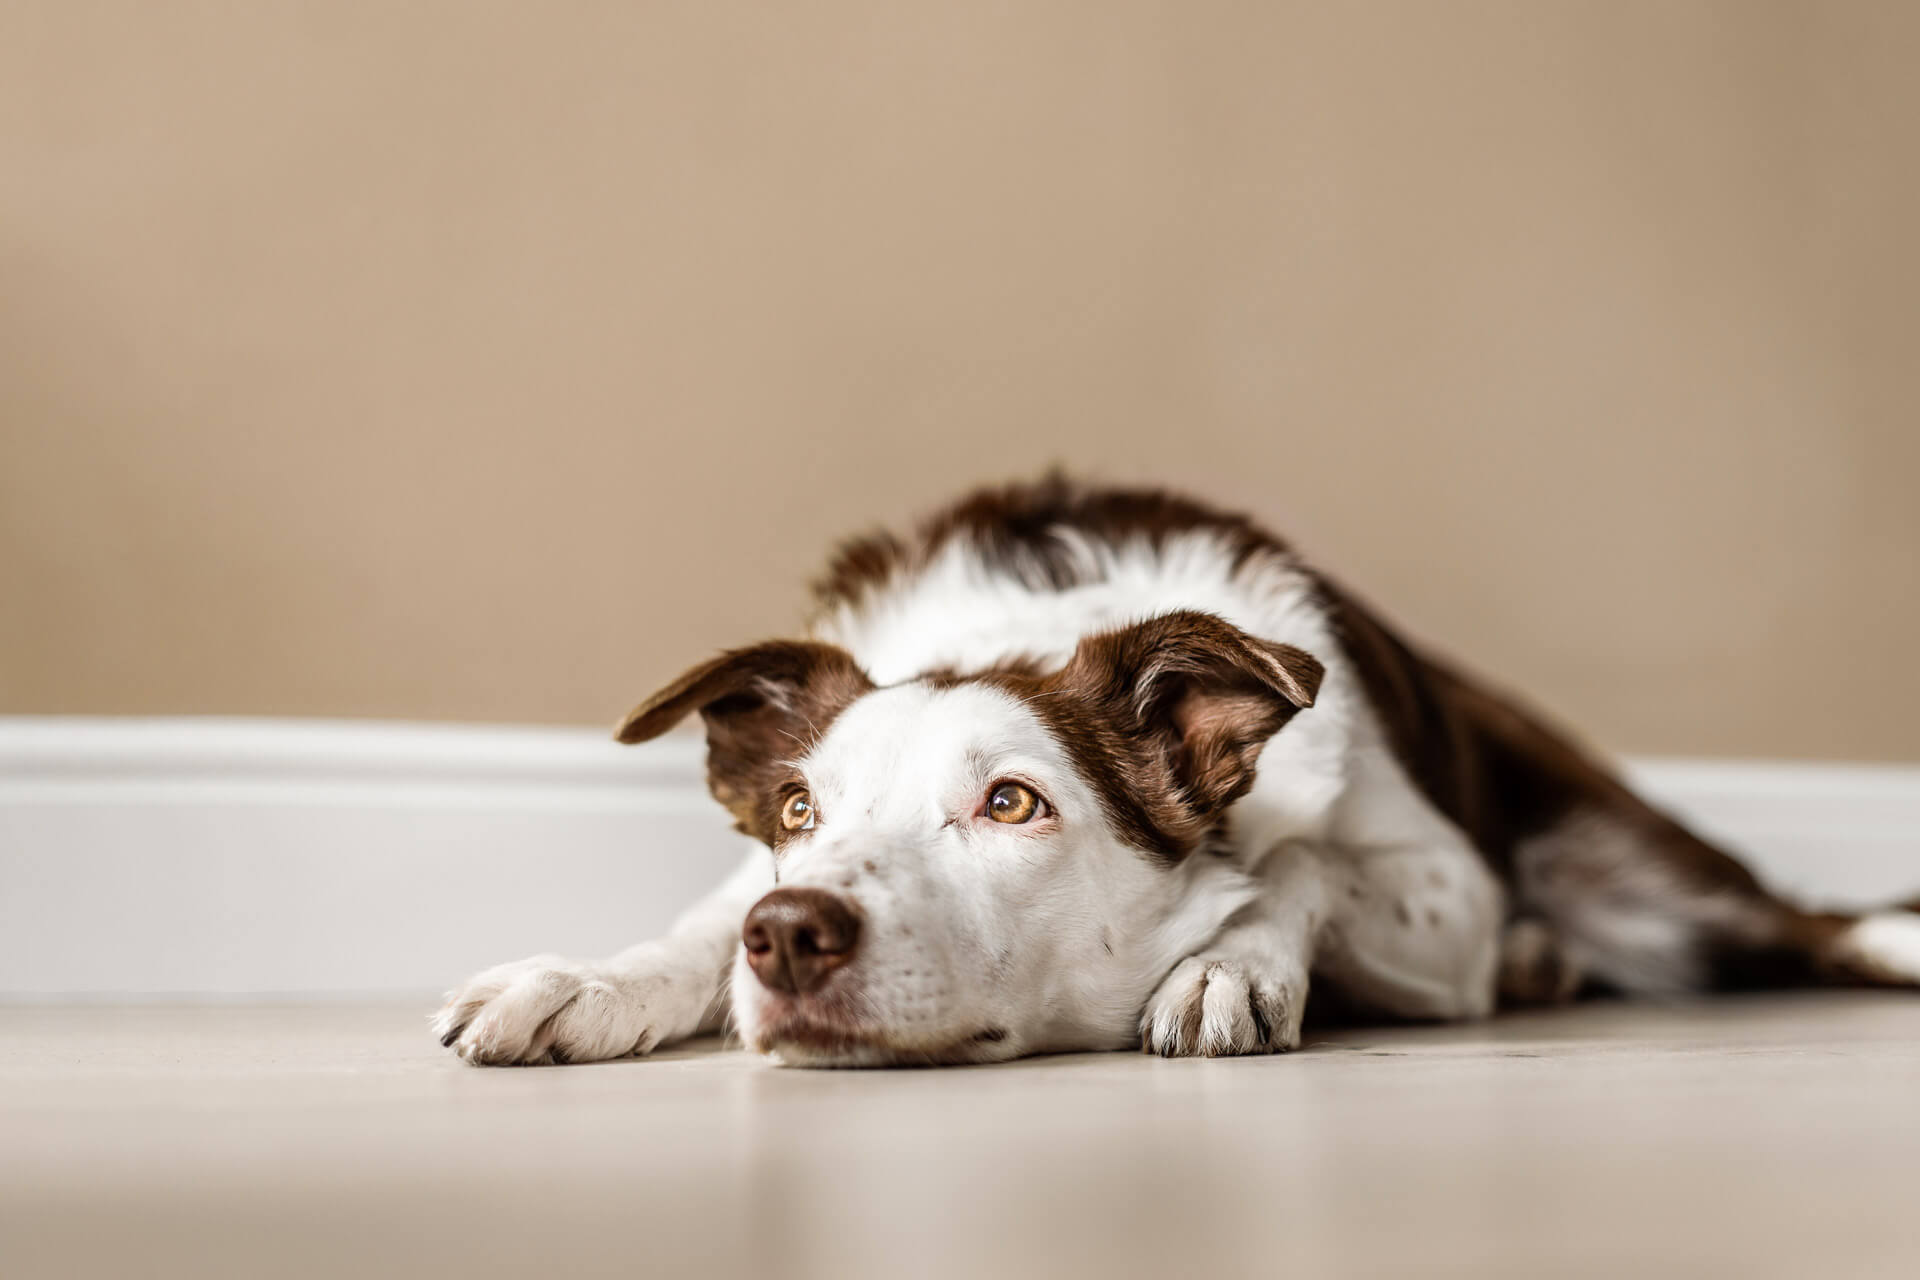 Brown and white dog lying on the floor - leaving dog home alone